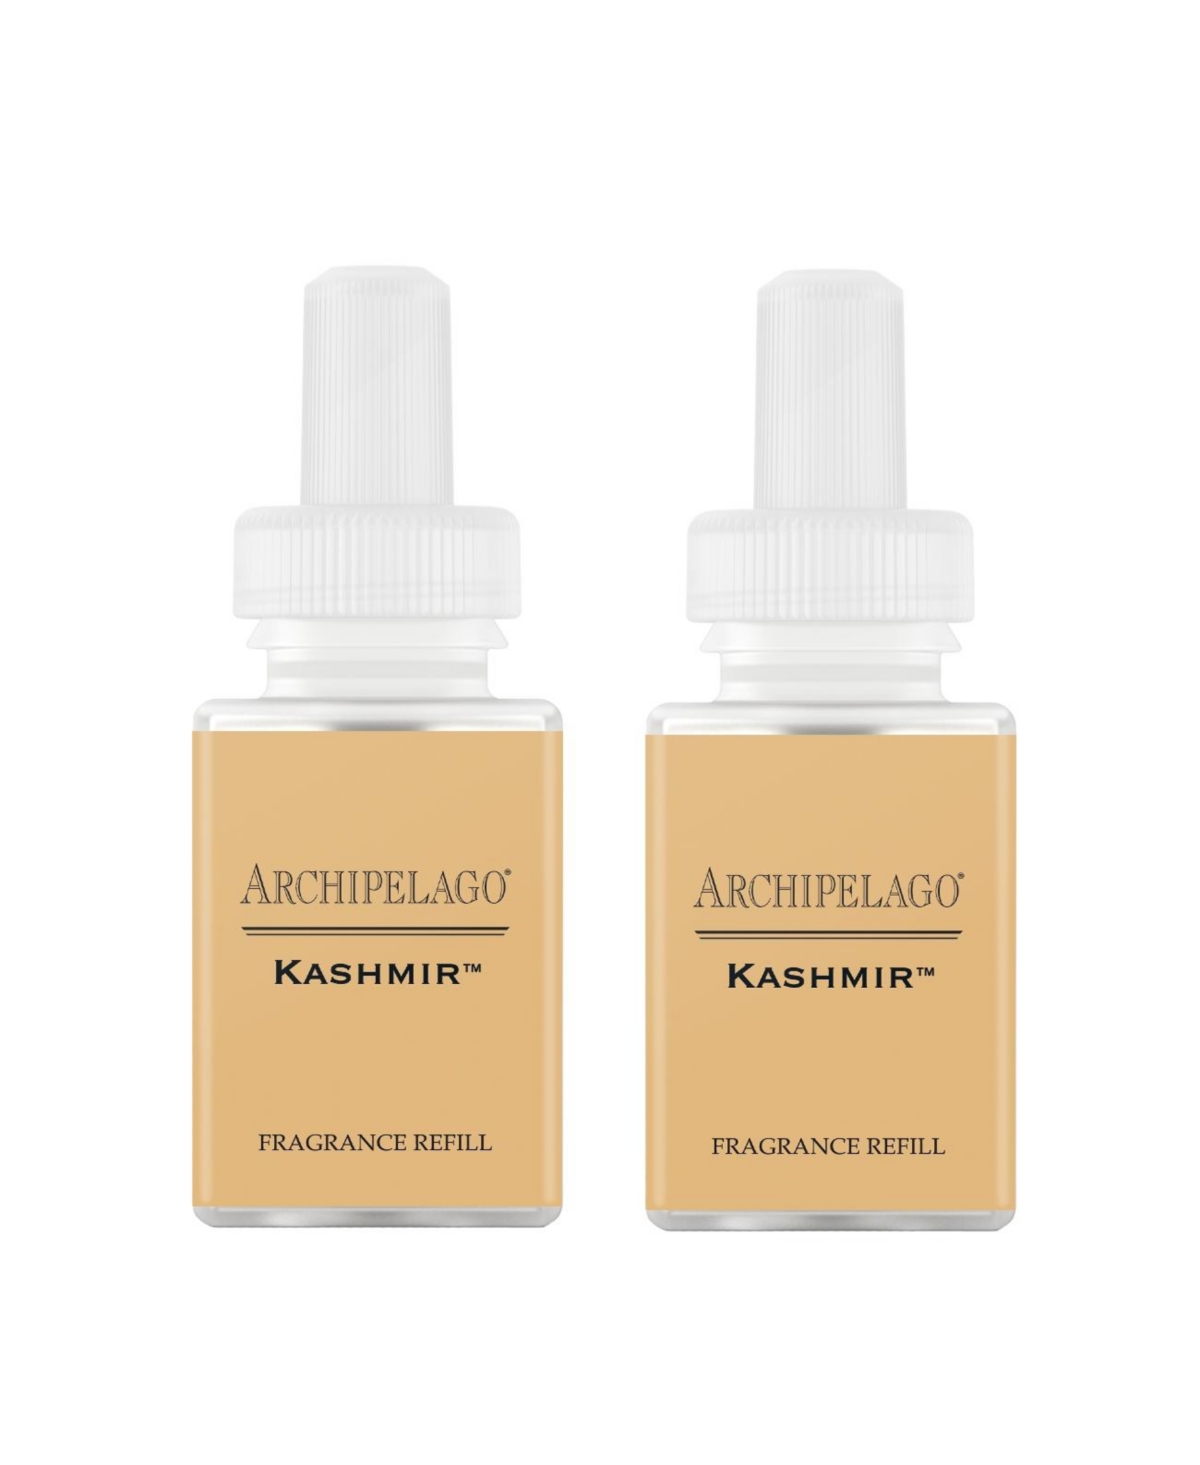 and Archipelago - Kashmir - Fragrance for Smart Home Air Diffusers - Room Freshener - Aromatherapy Scents for Bedrooms & Living Rooms - 2 Pack